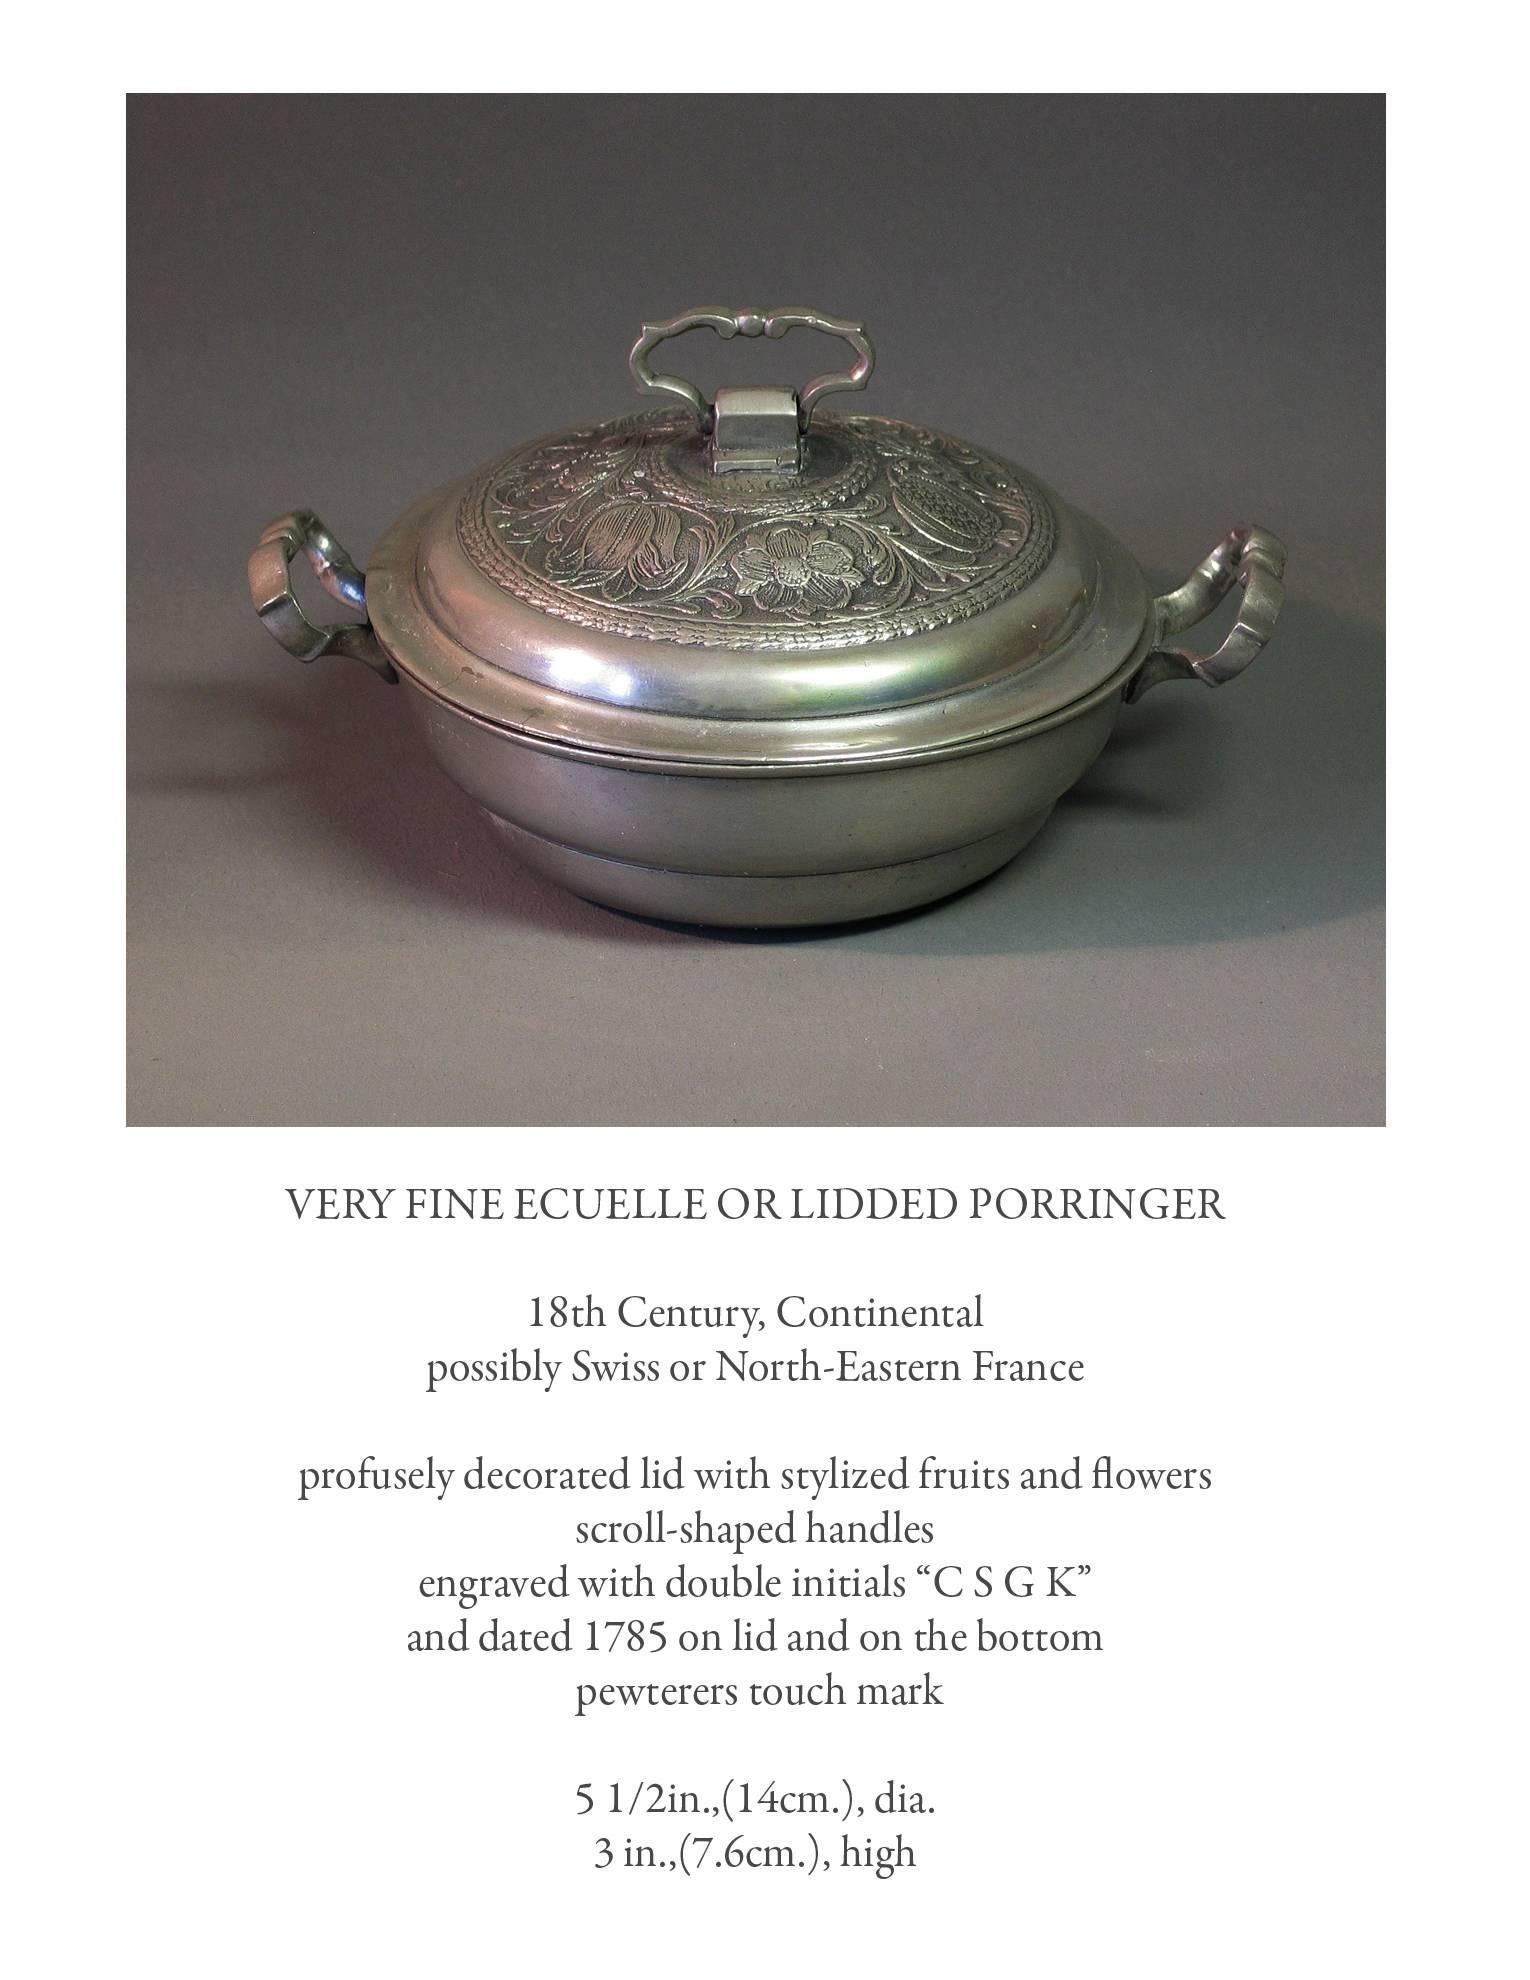 Very fine Pewter Ecuelle or lidded porringer, 18th century, continental, possibly swiss or north eastern France. Profusely decorated lid with stylized fruits and flowers, scroll shaped handles engraved with double initials 